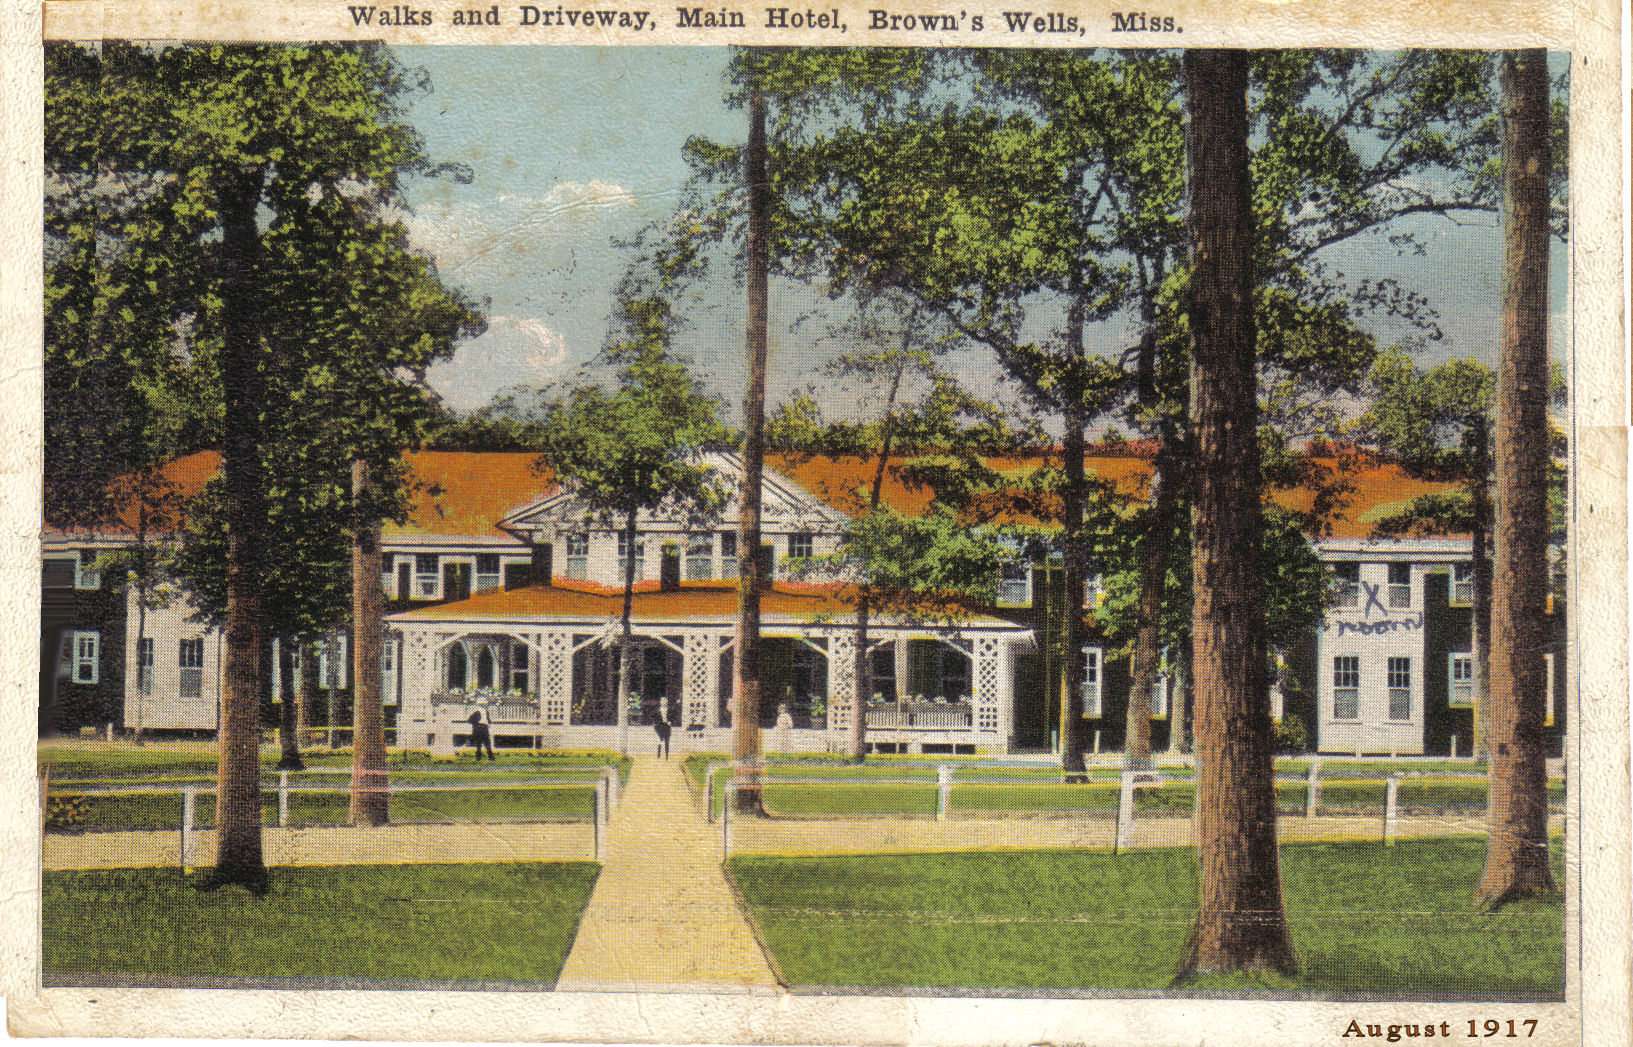 Postcard of Brown's Well in 1917